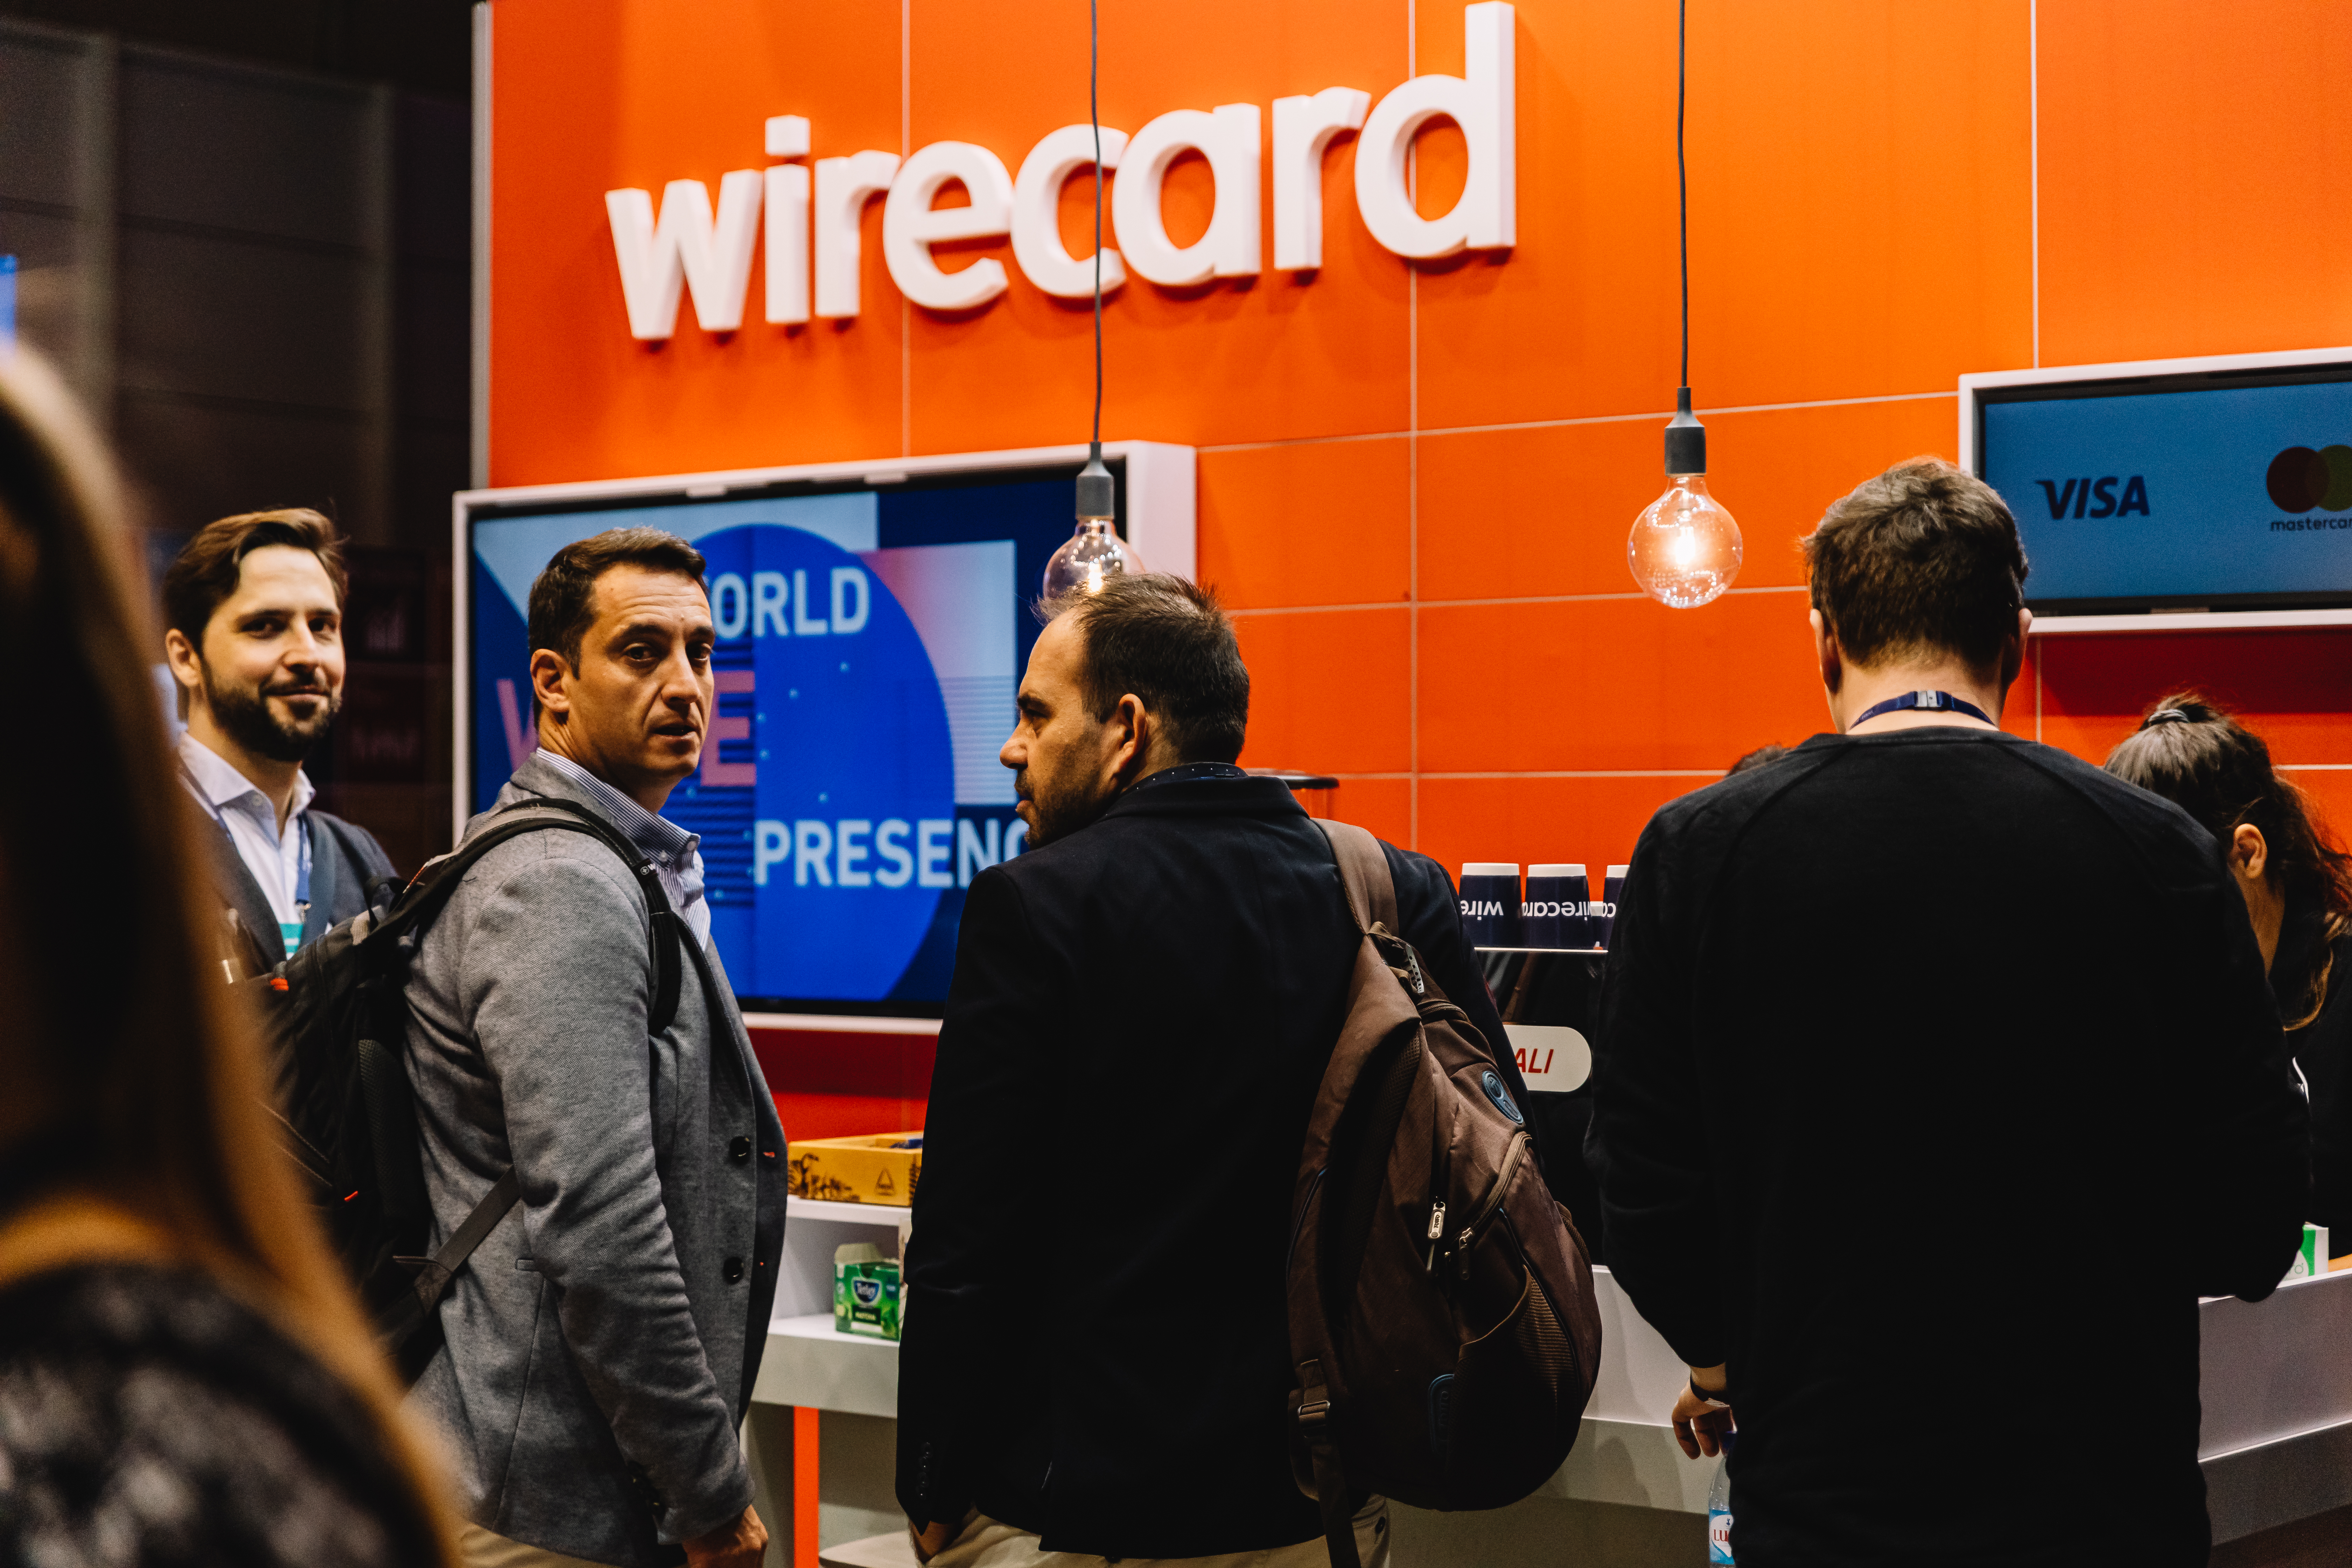 Inside the Financial Times’ Wirecard investigation